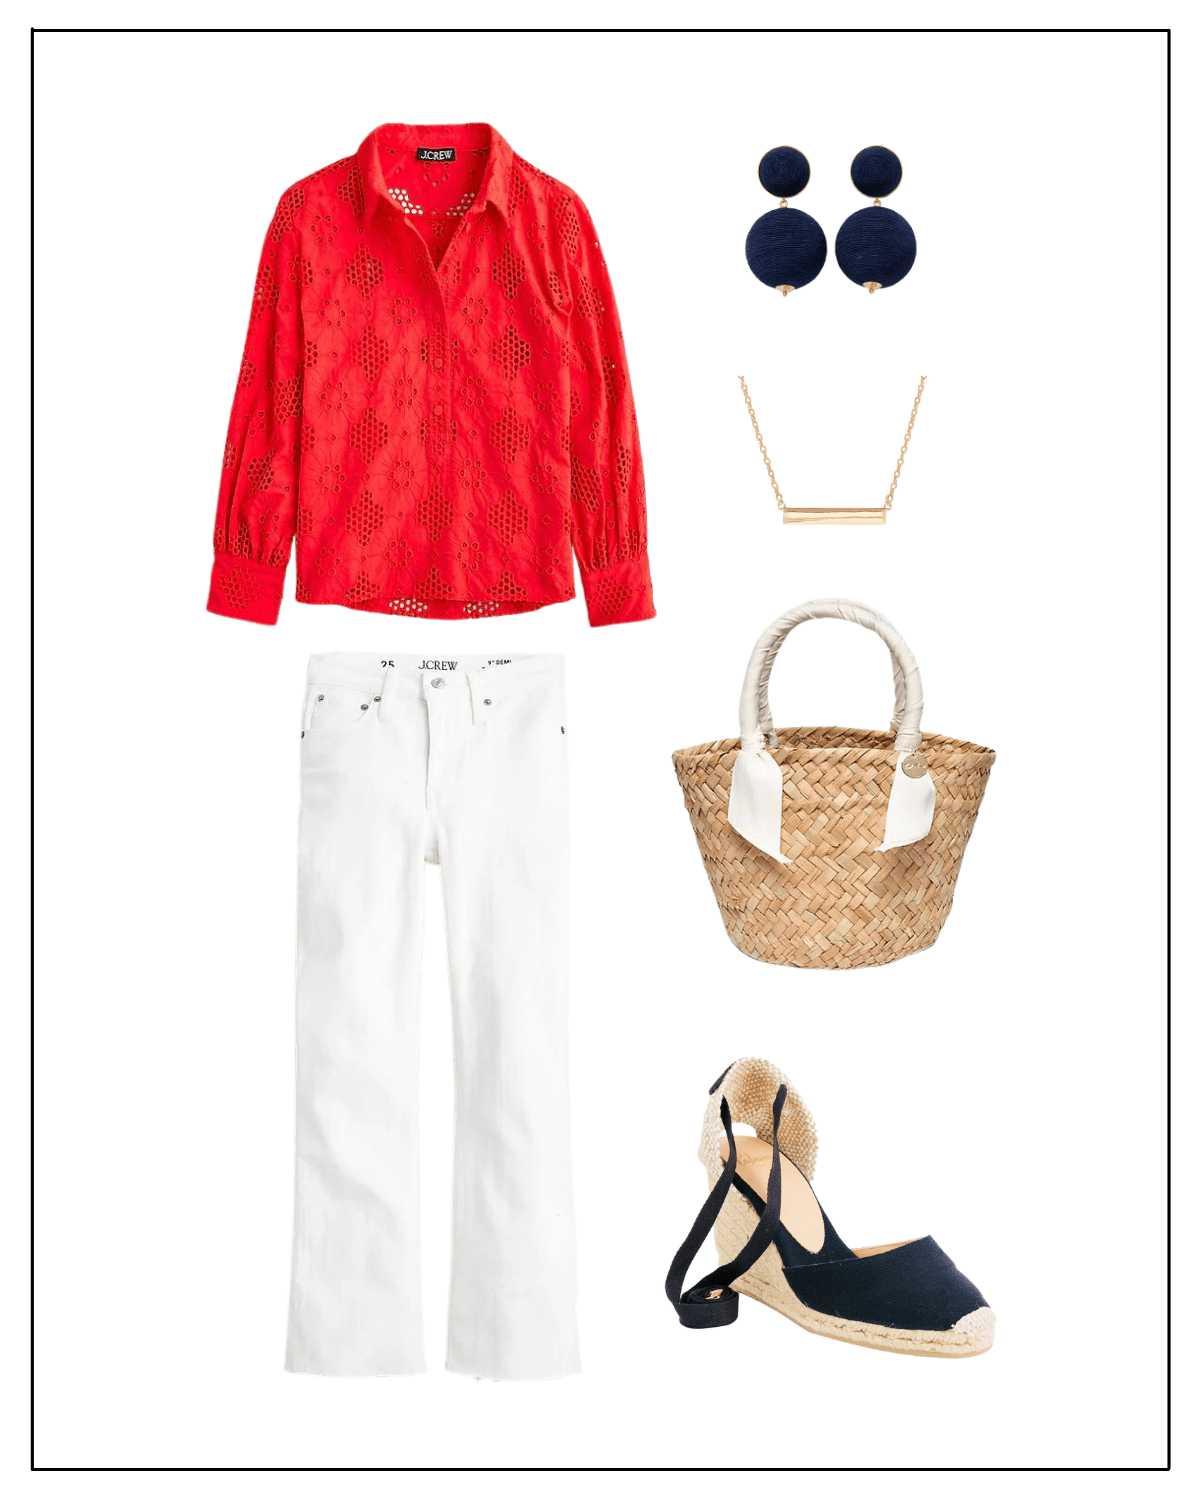 4th of July Outfits for a backyard cookout